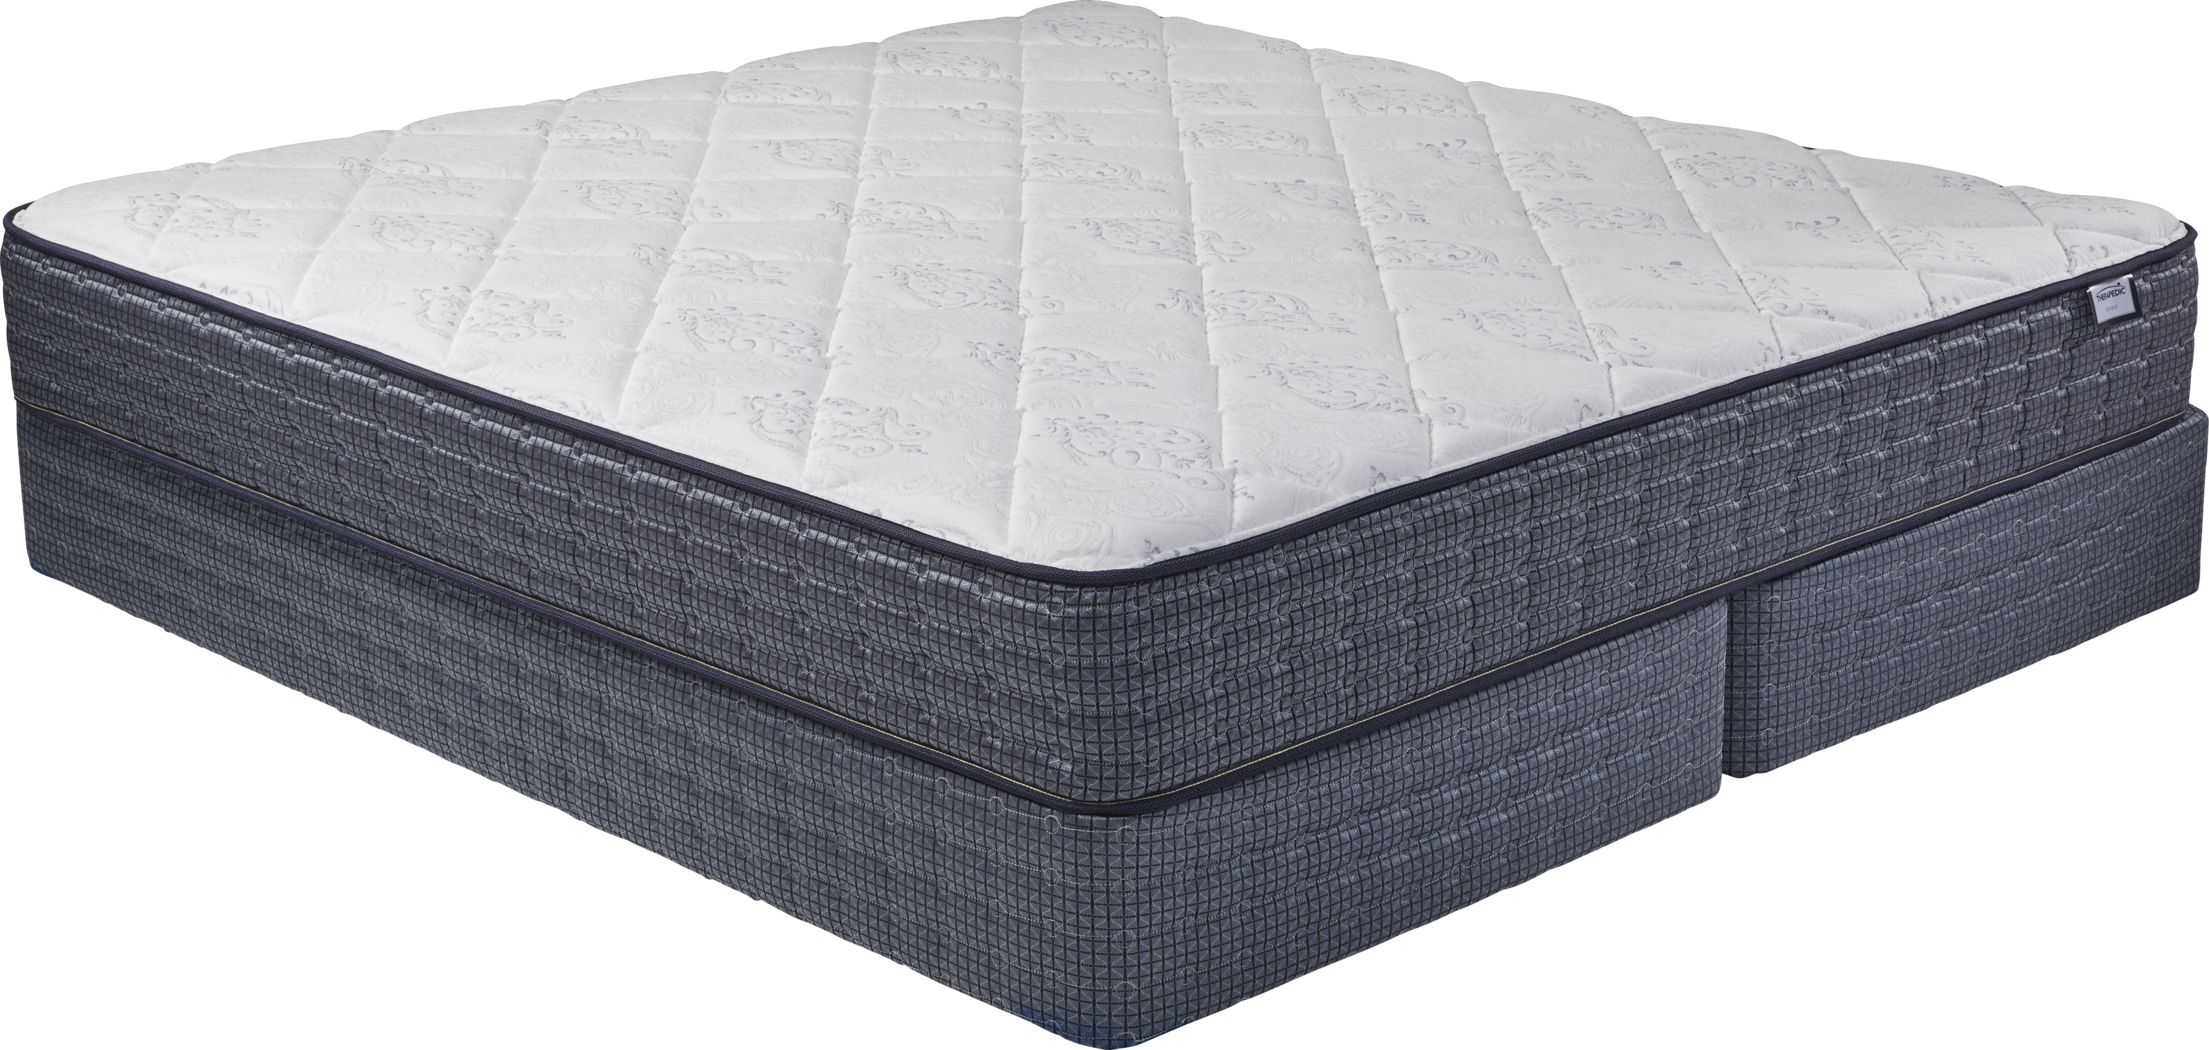 Discount Mattresses - Rooms To Go Outlet